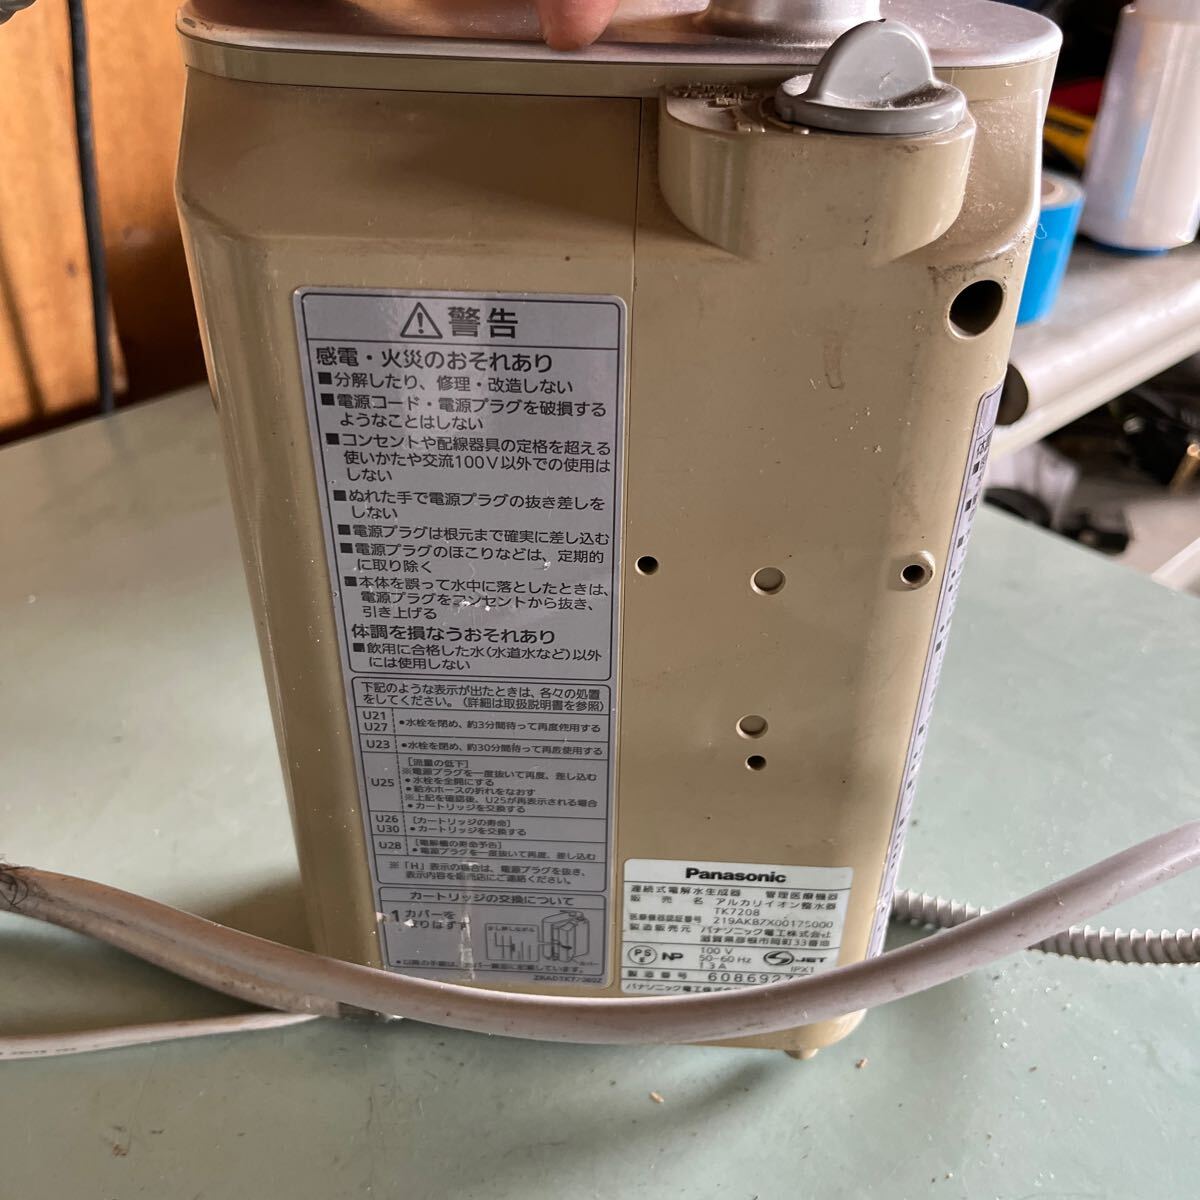 Panasonic Panasonic water ionizer TK7208 continuation type electrolysis aquatic . vessel water purifier water filter used present condition goods 